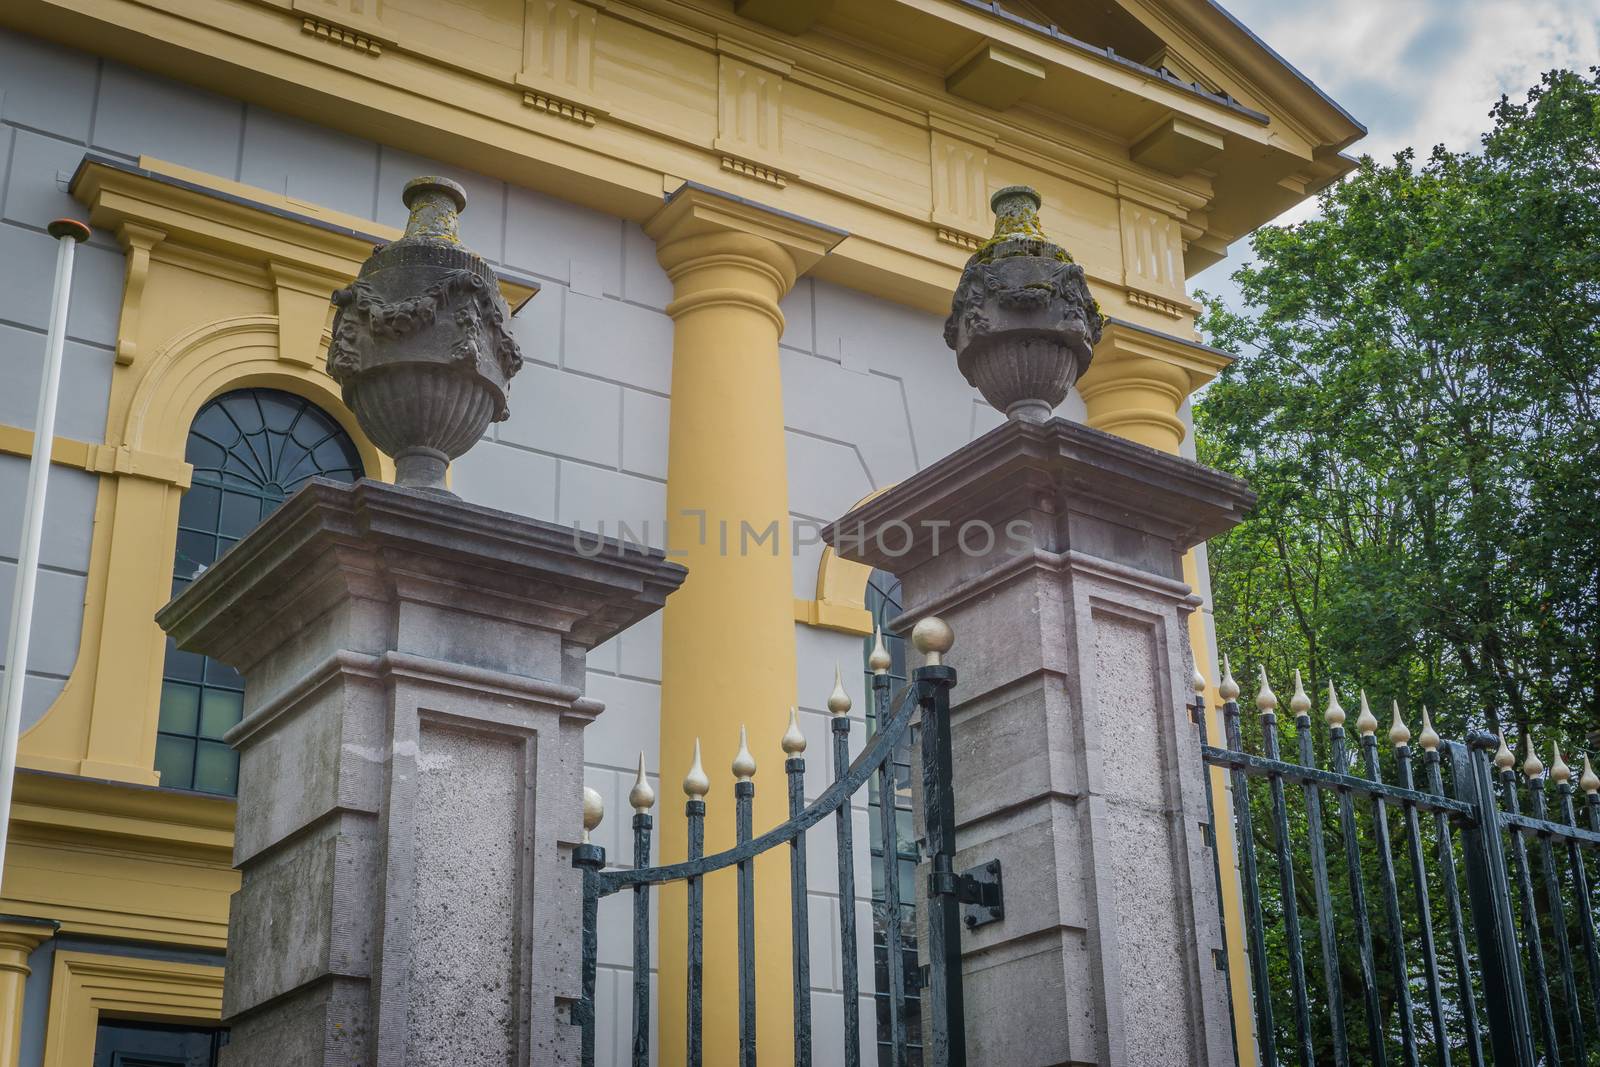 beautiful decorated church fence with stone pillars with jars on them